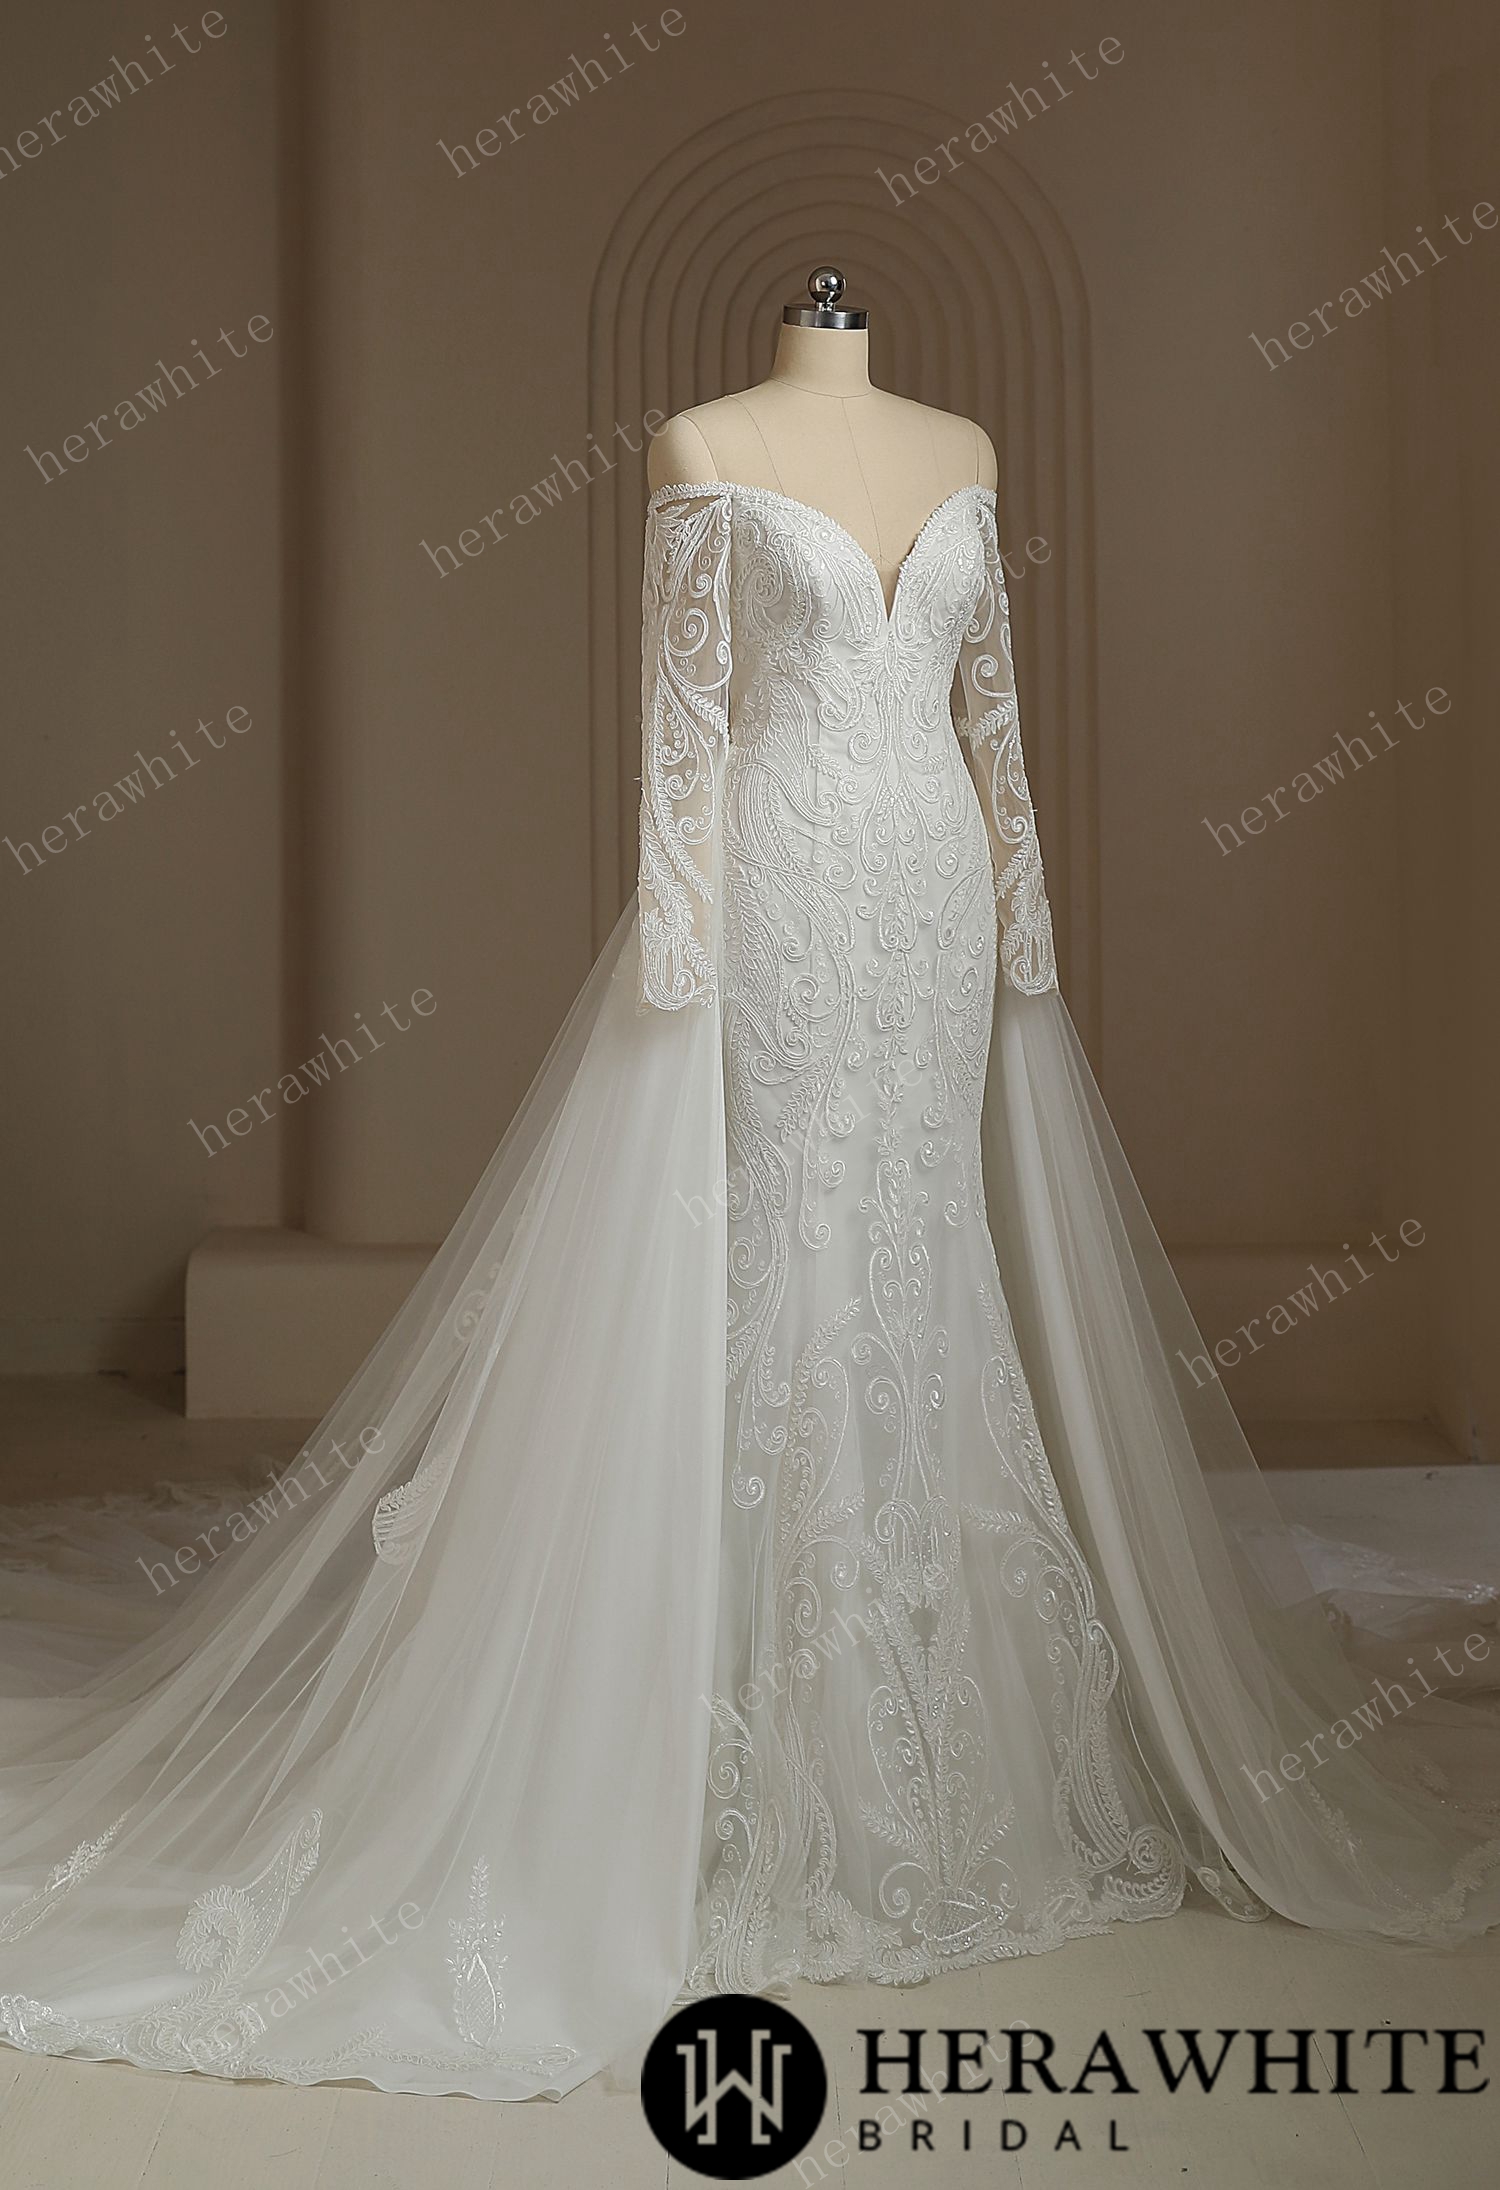 Exquisite Lace Mermaid Wedding Dress With Detached Train